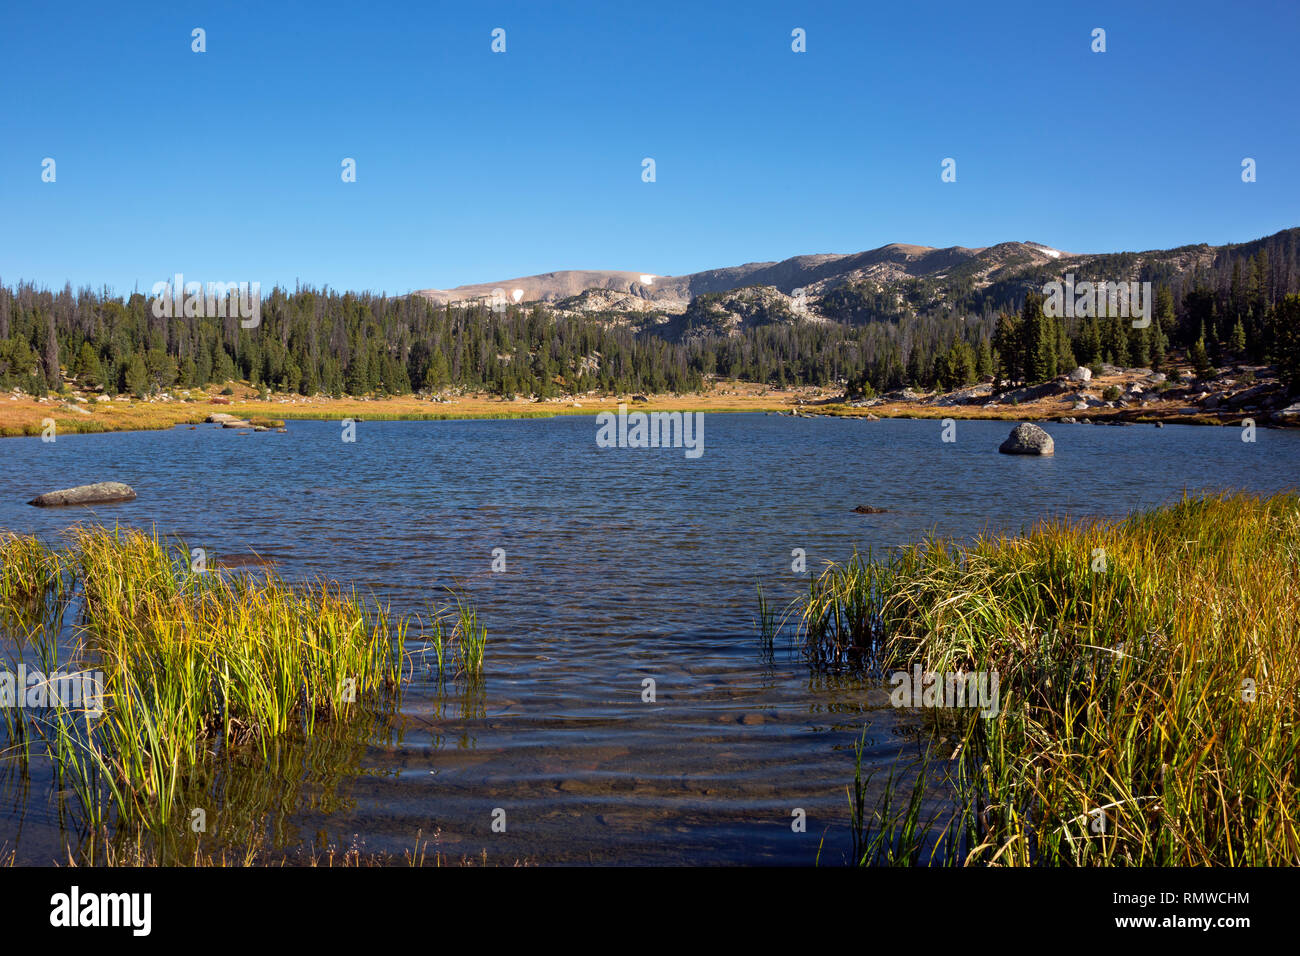 WY03755-00...WYOMING - Night Lake, a popular campsite along the Beartooth Highlakes Trail in the Beartooth Mountains area of Shoshone National Forest. Stock Photo